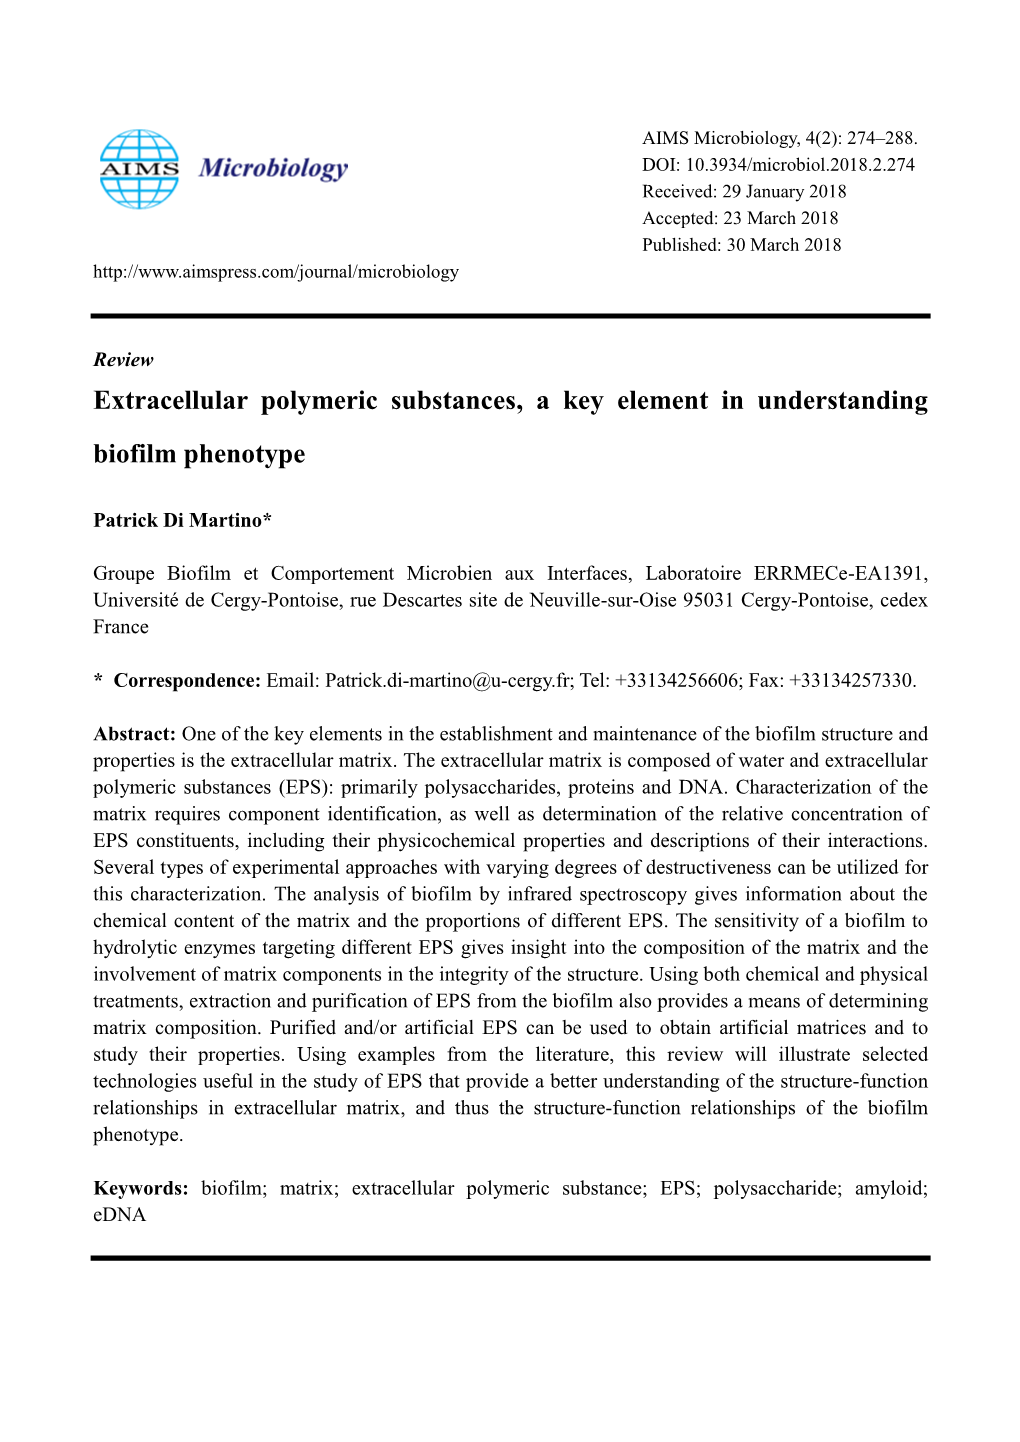 Extracellular Polymeric Substances, a Key Element in Understanding Biofilm Phenotype